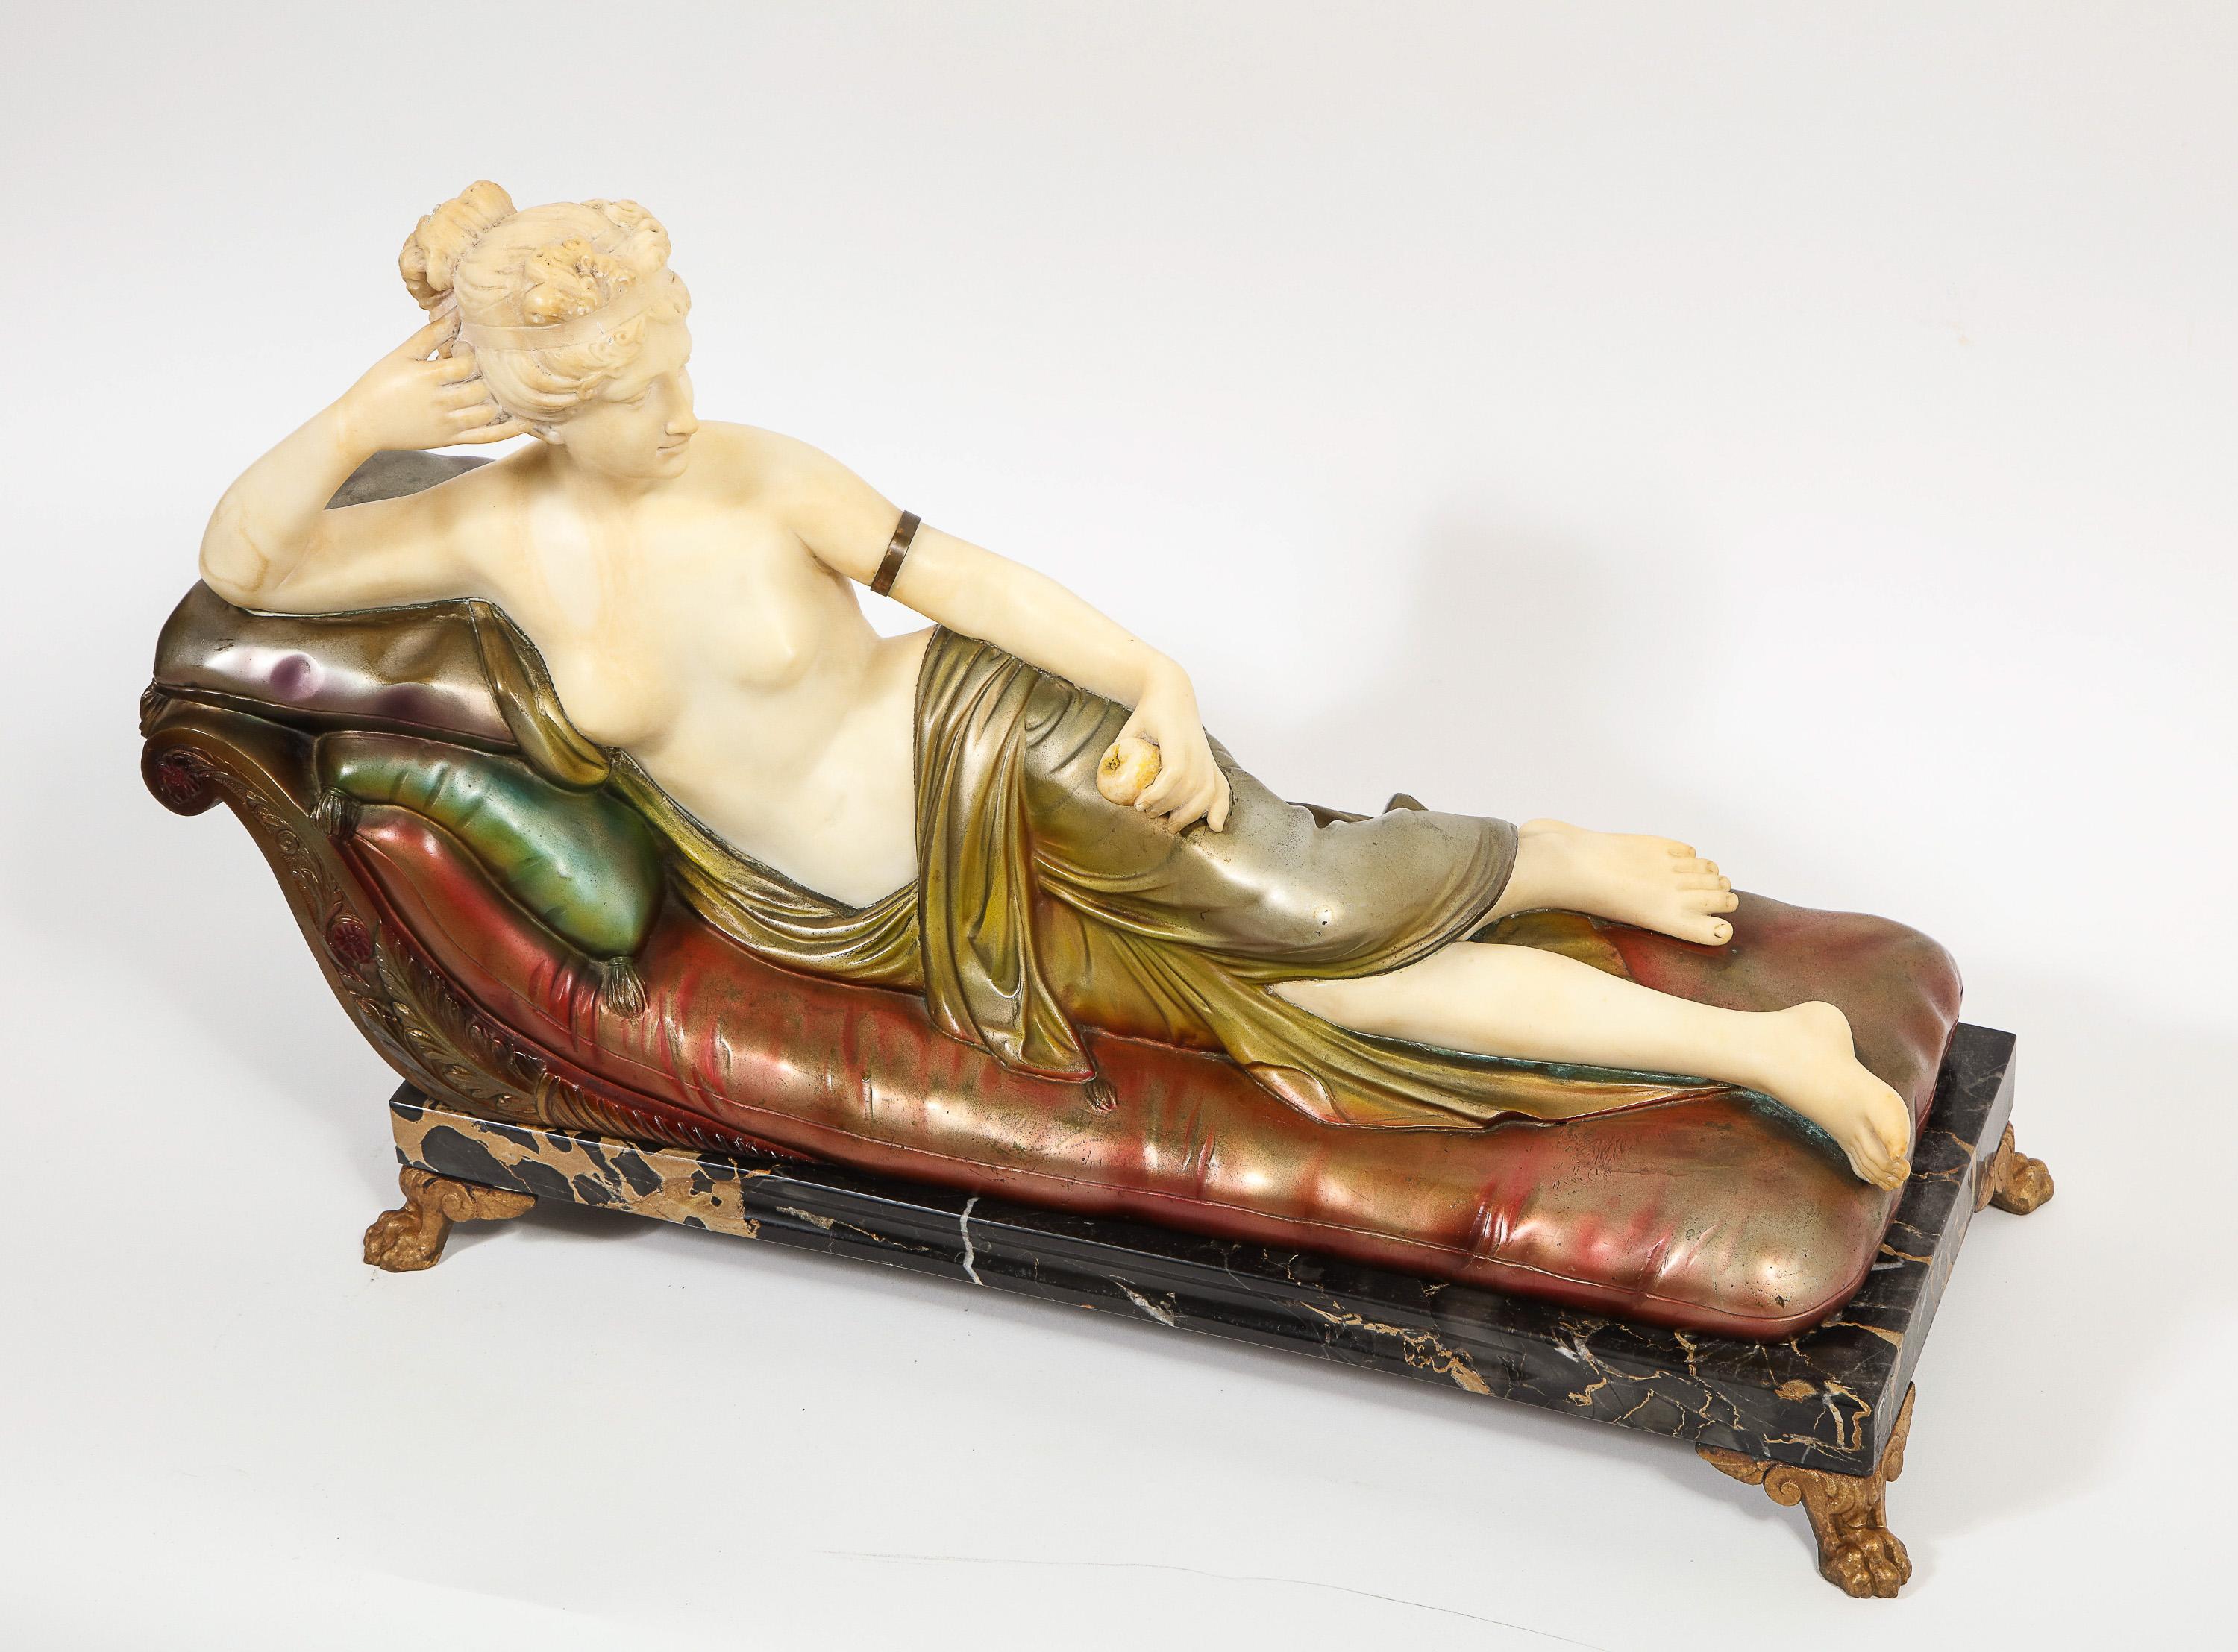 Exceptional neoclassical Italian alabaster and iridescent polychrome metal sculpture of Paulina Bonaparte Borghese, circa 1880.

This iconic, elegant sculpture depicts Paulina Bonaparte as Venus Victrix (Venus (Victorius) after the famous model by